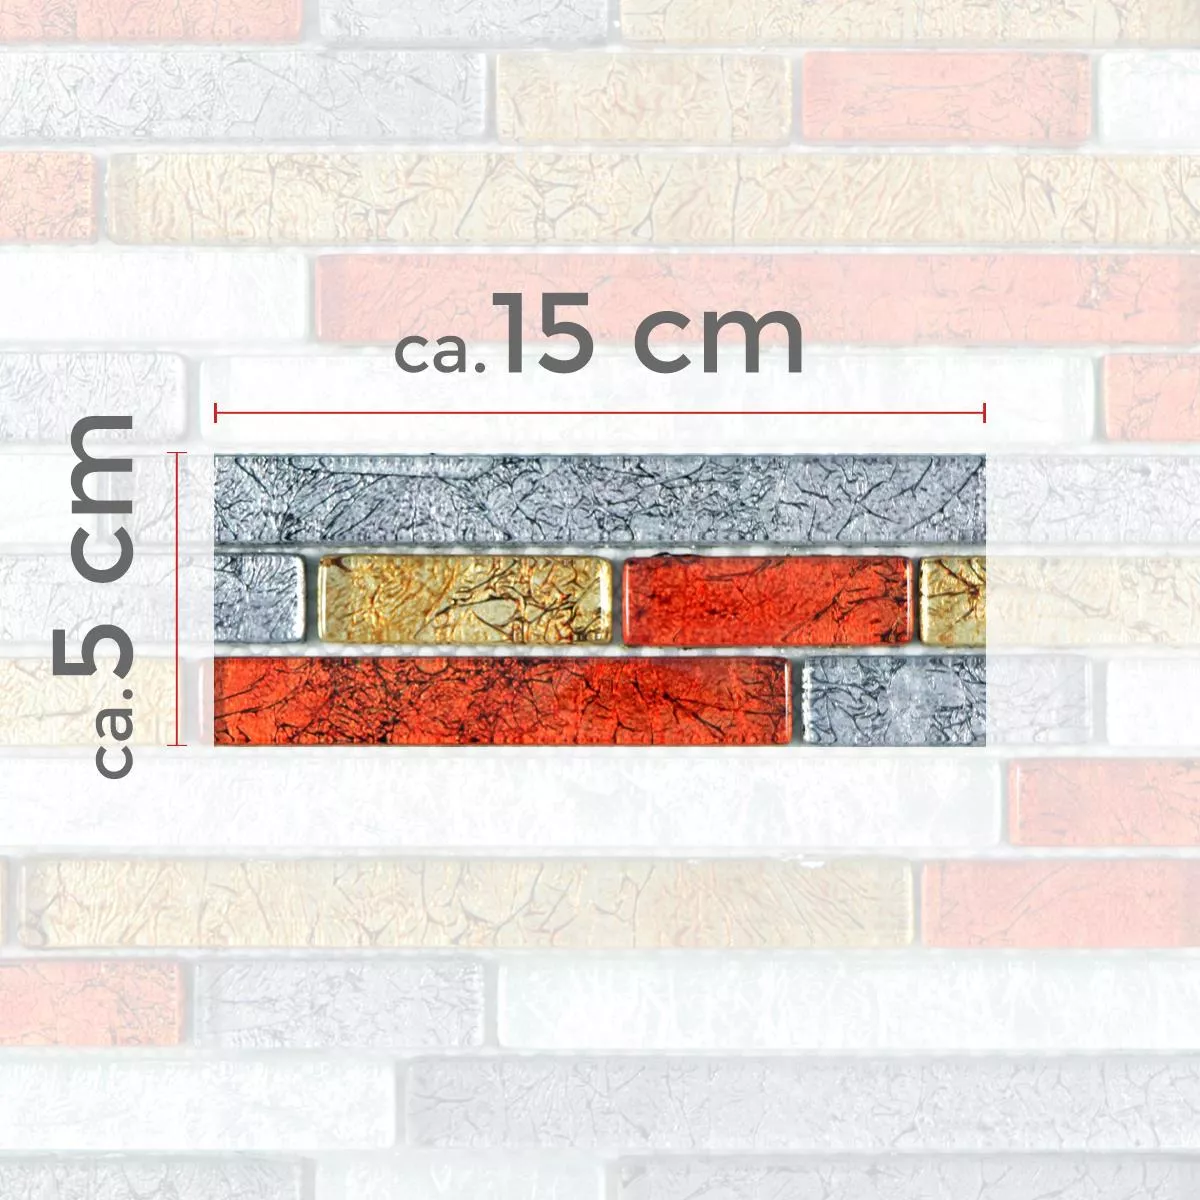 Sample Glass Mosaic Tiles Curlew Red Brown Silver Pattern